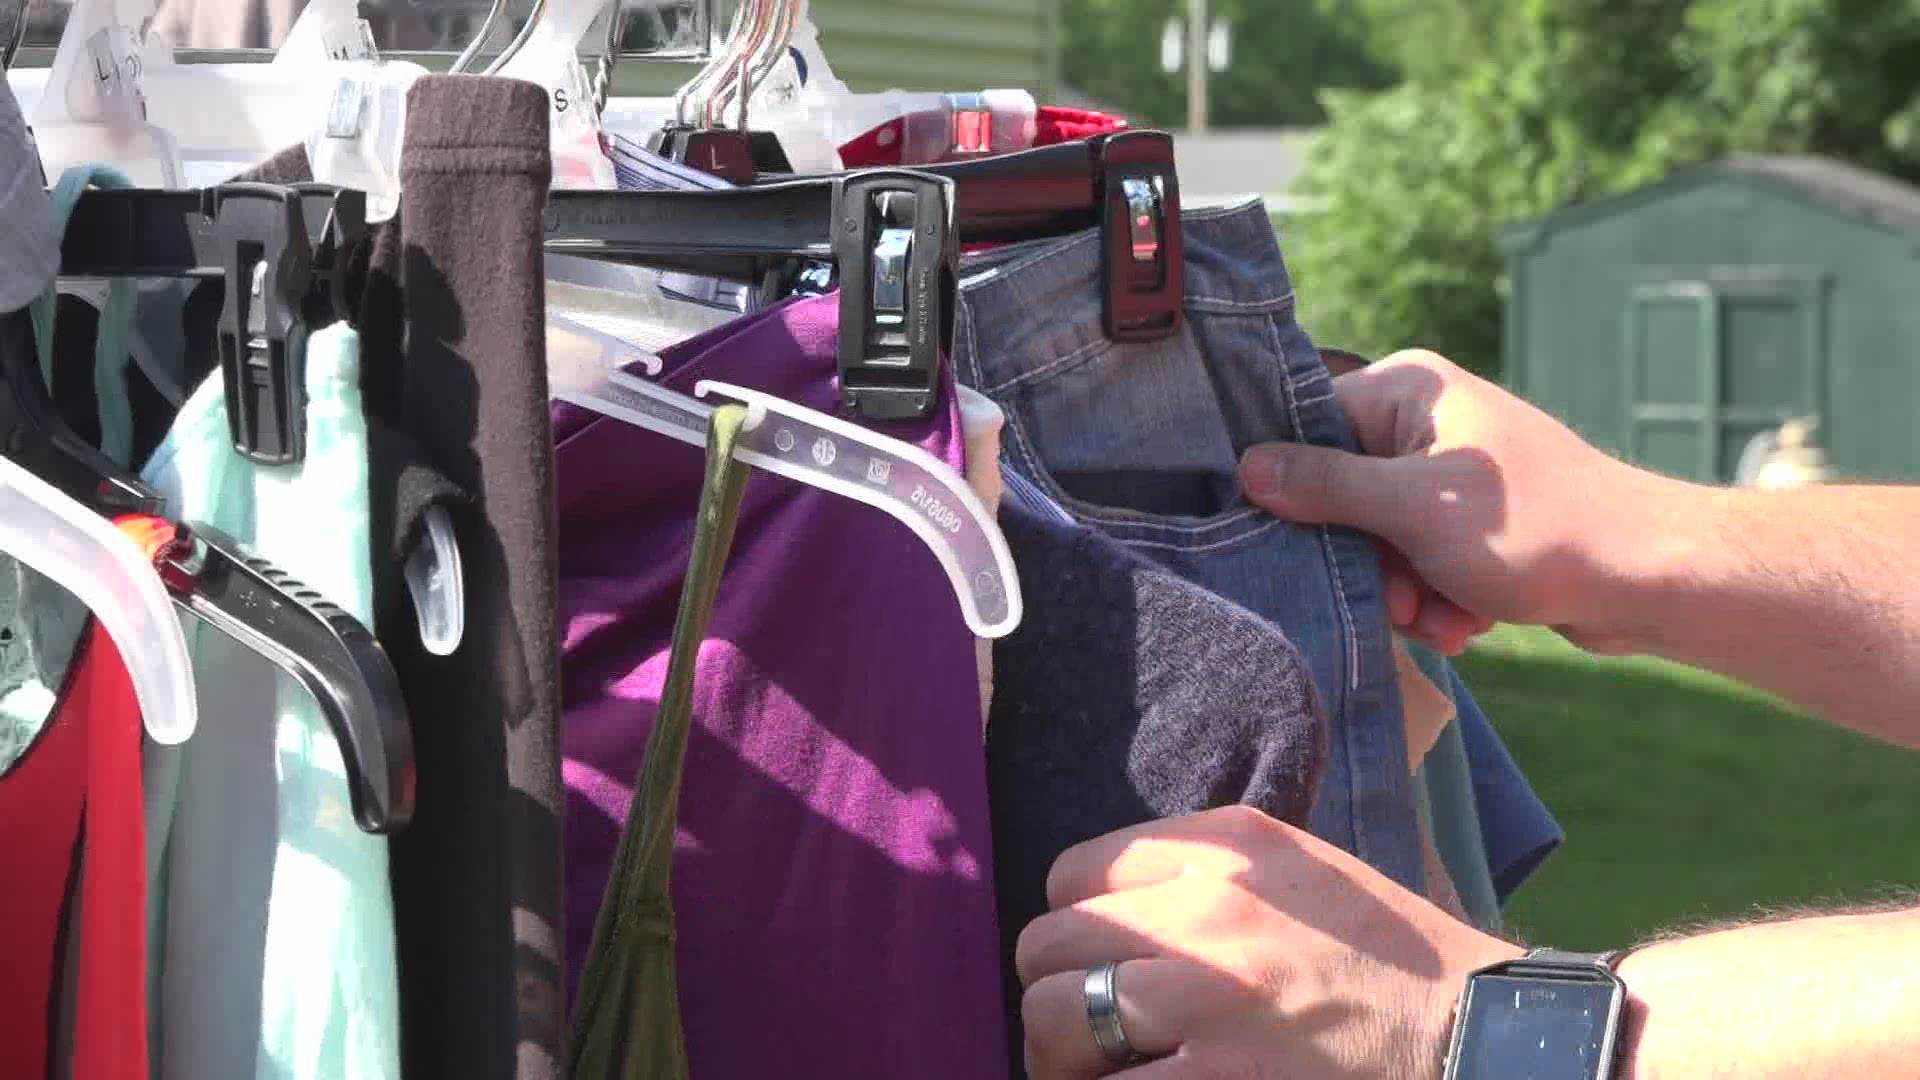 Michigan is reopening as yard sale season gets into full swing, but people who love this time of year are making changes to the way they shop.